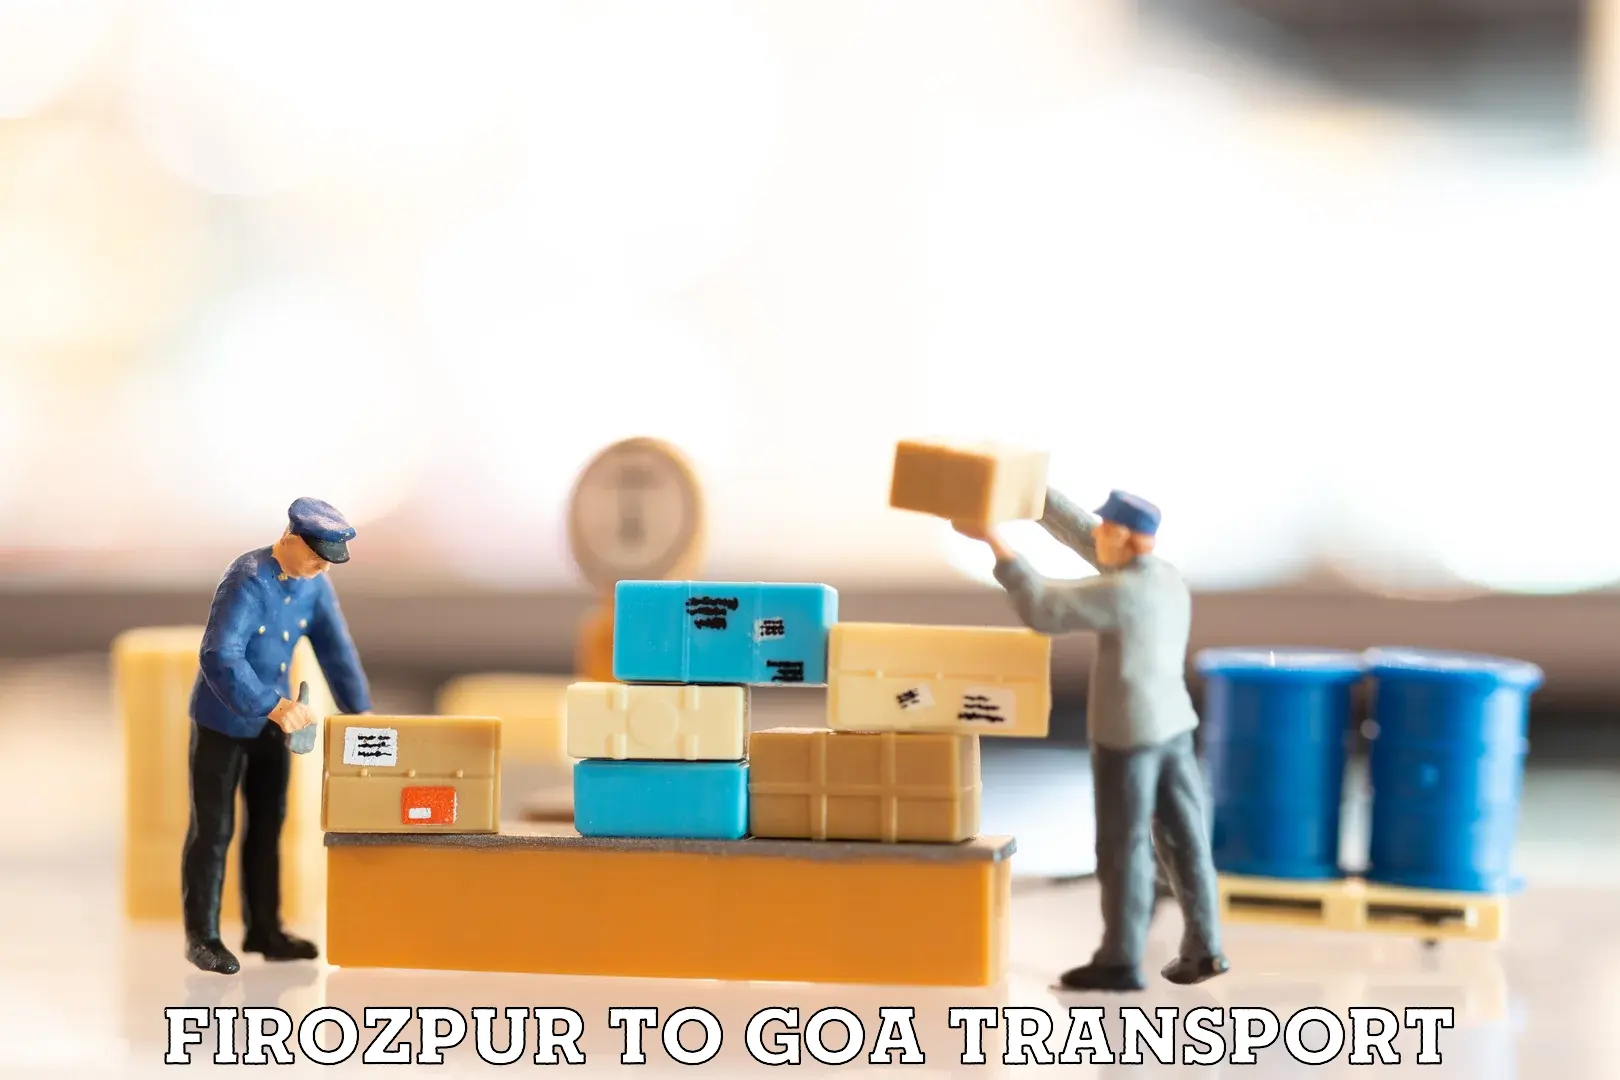 Delivery service Firozpur to Panaji